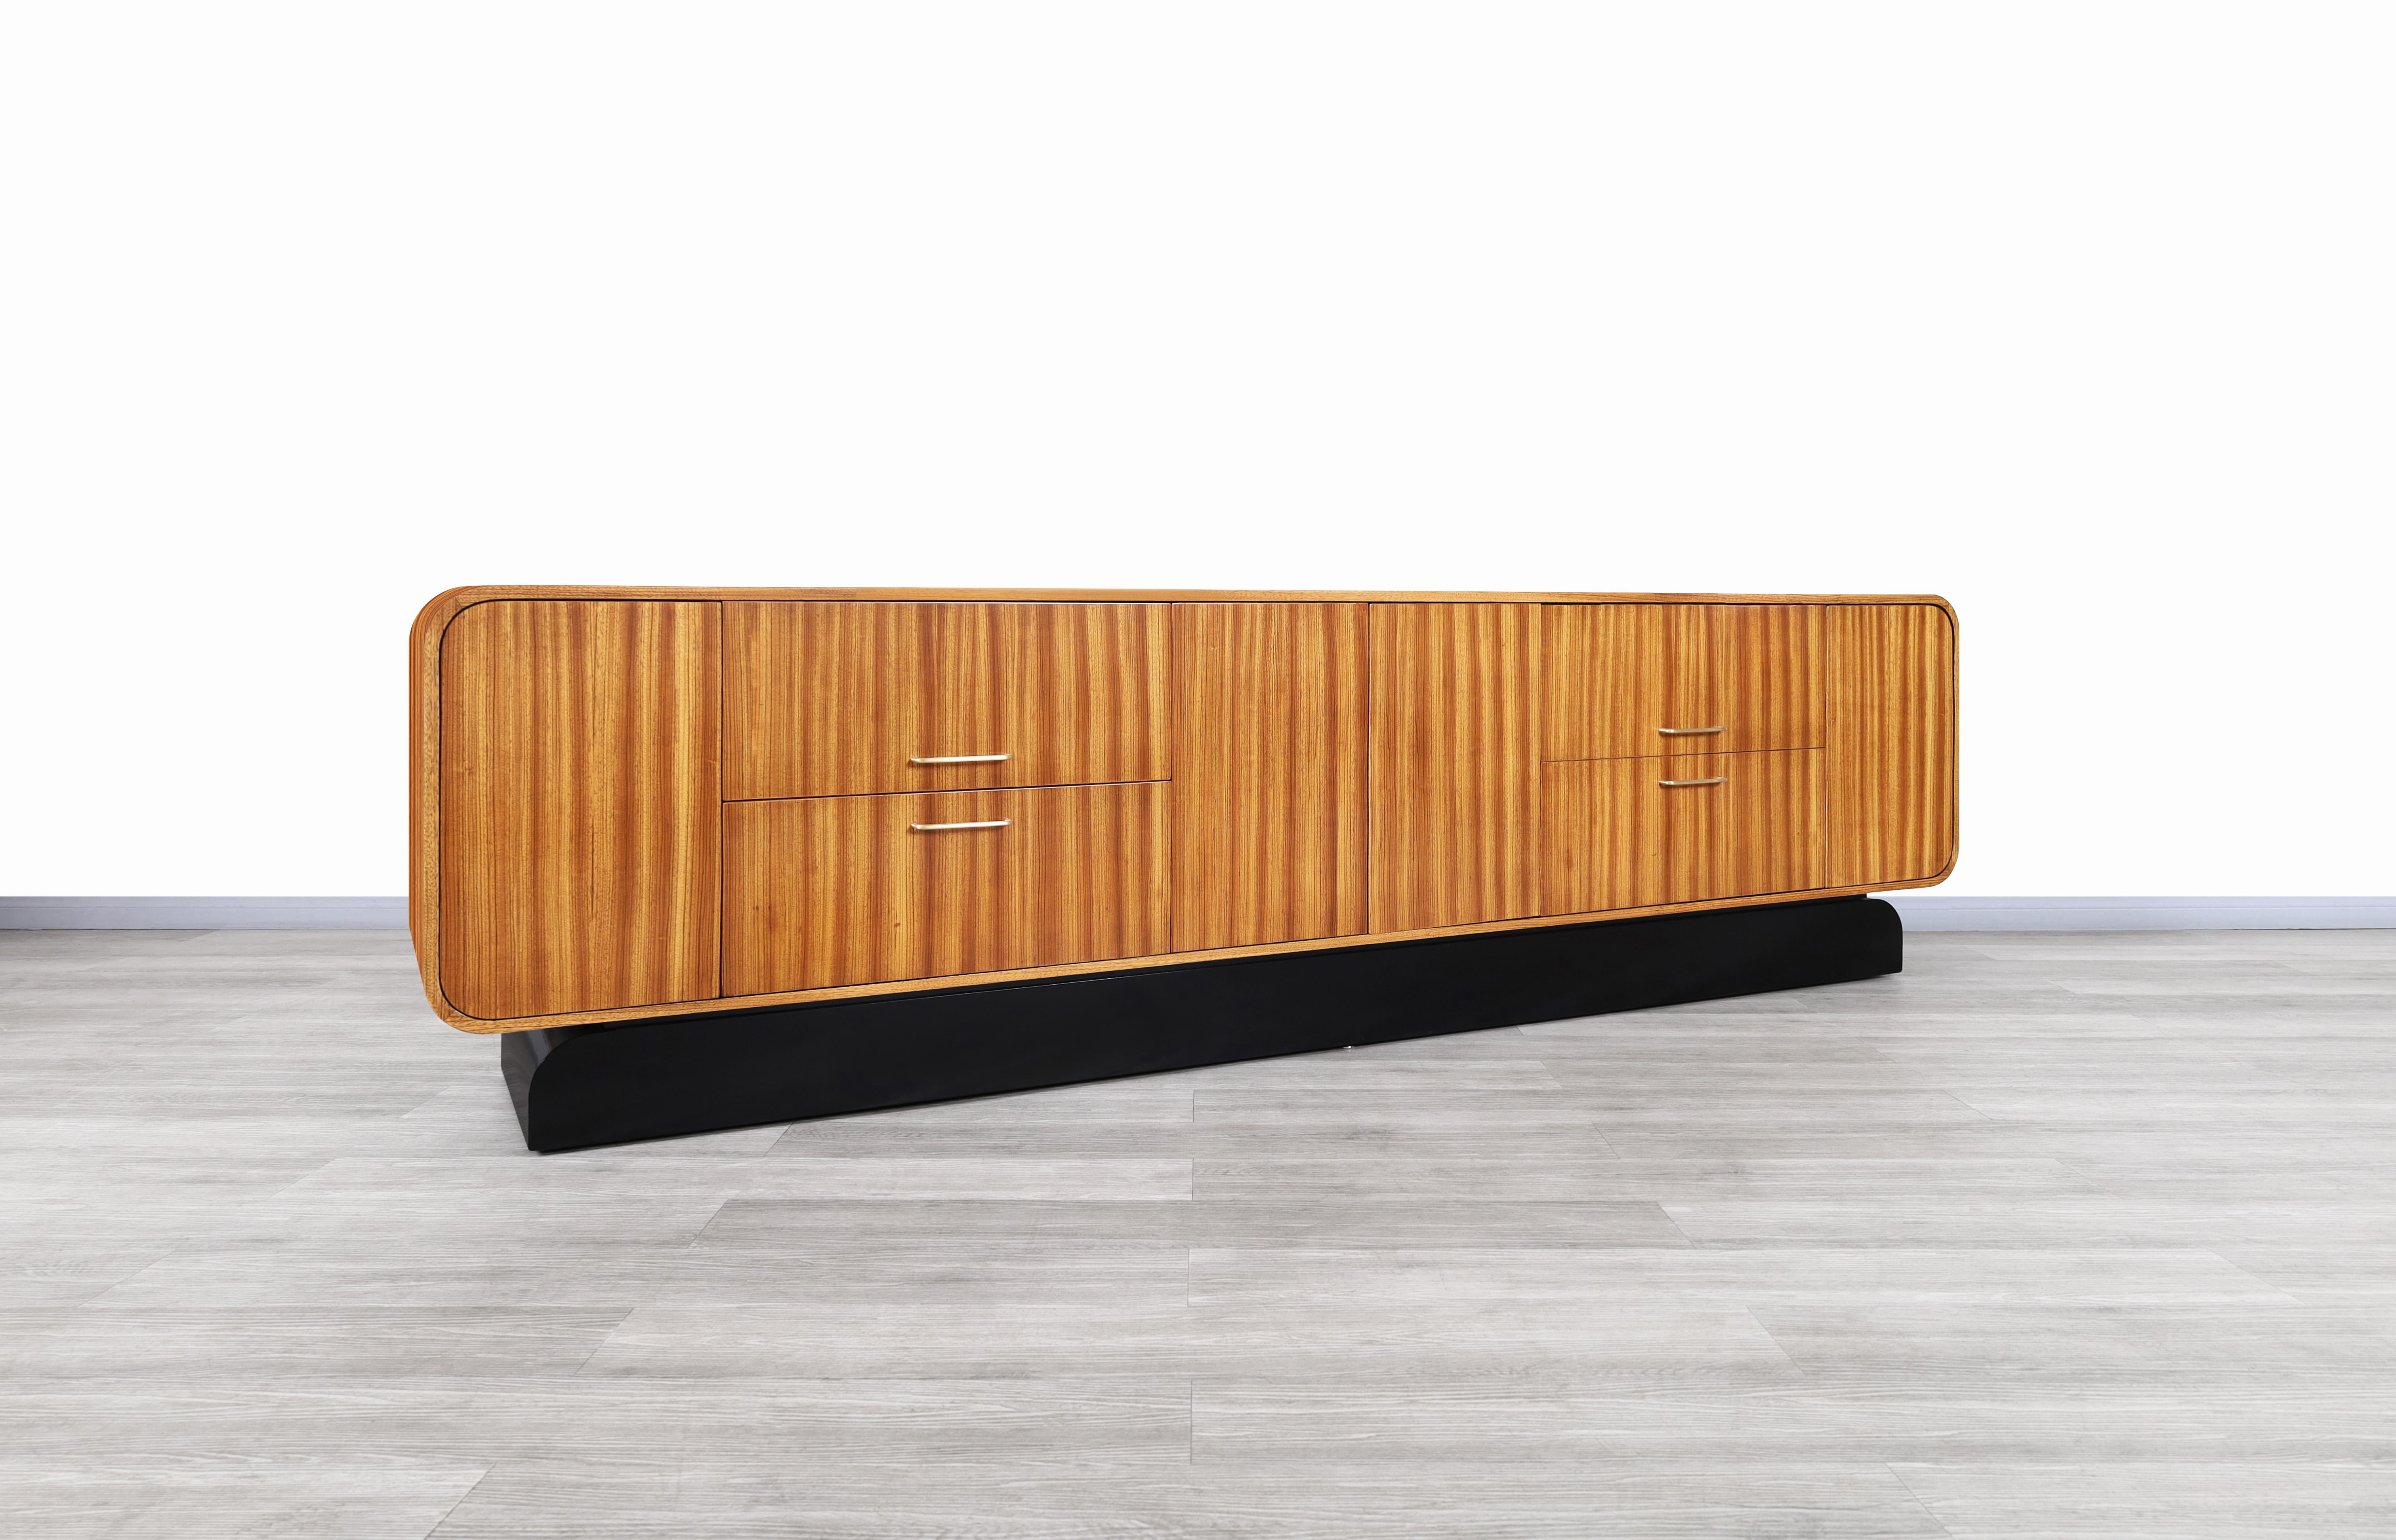 Vintage monumental zebra wood credenza designed and manufactured in the United States, circa 1980s. This credenza stands out for the exquisite design that is represented through its unique curves. It's complemented by the elegant contrast of colors